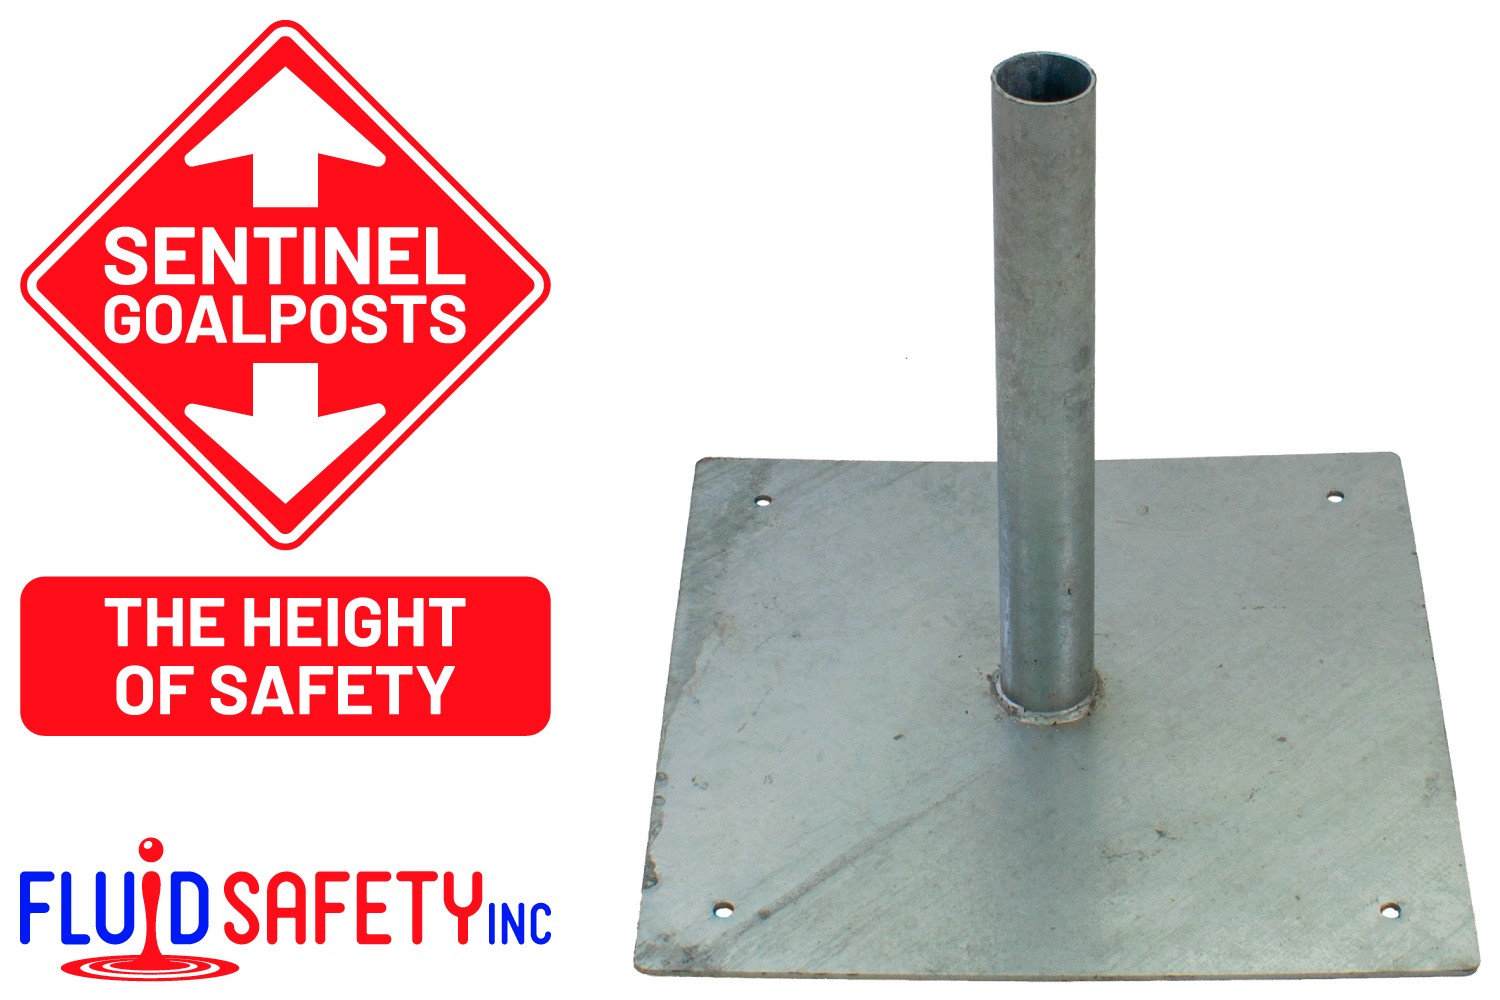 Red Telescopic Poles and Bunting for Height Restrction Barriers